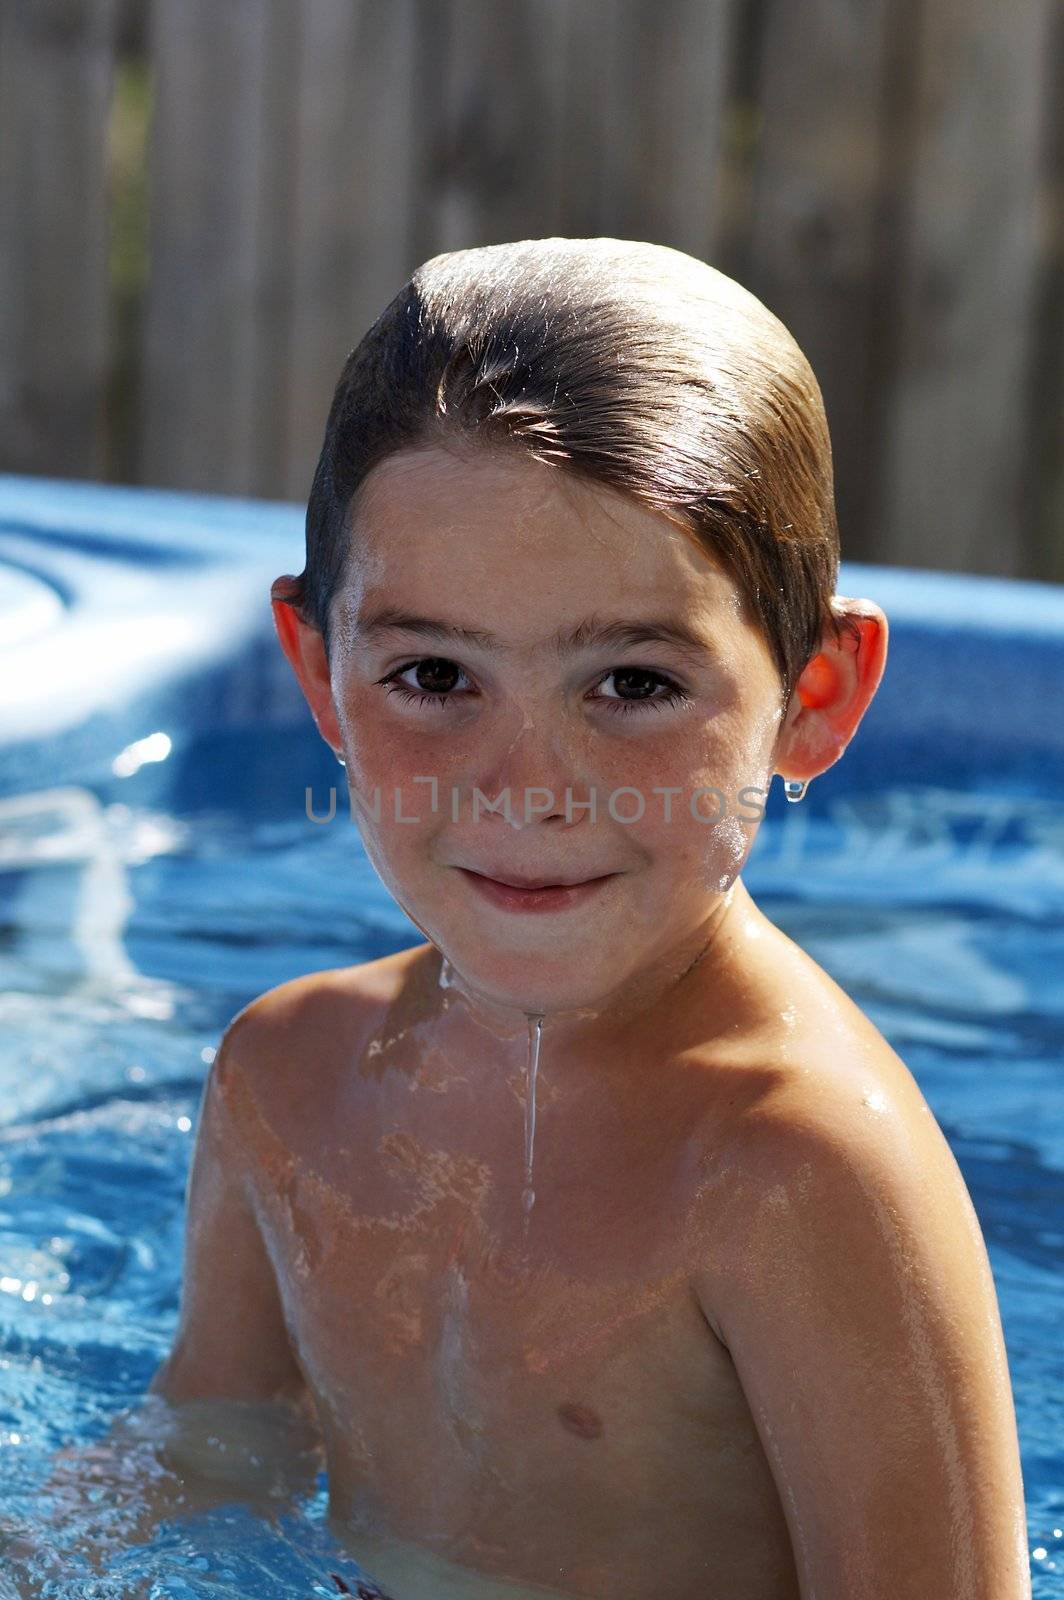 cute young boy in pool smiling